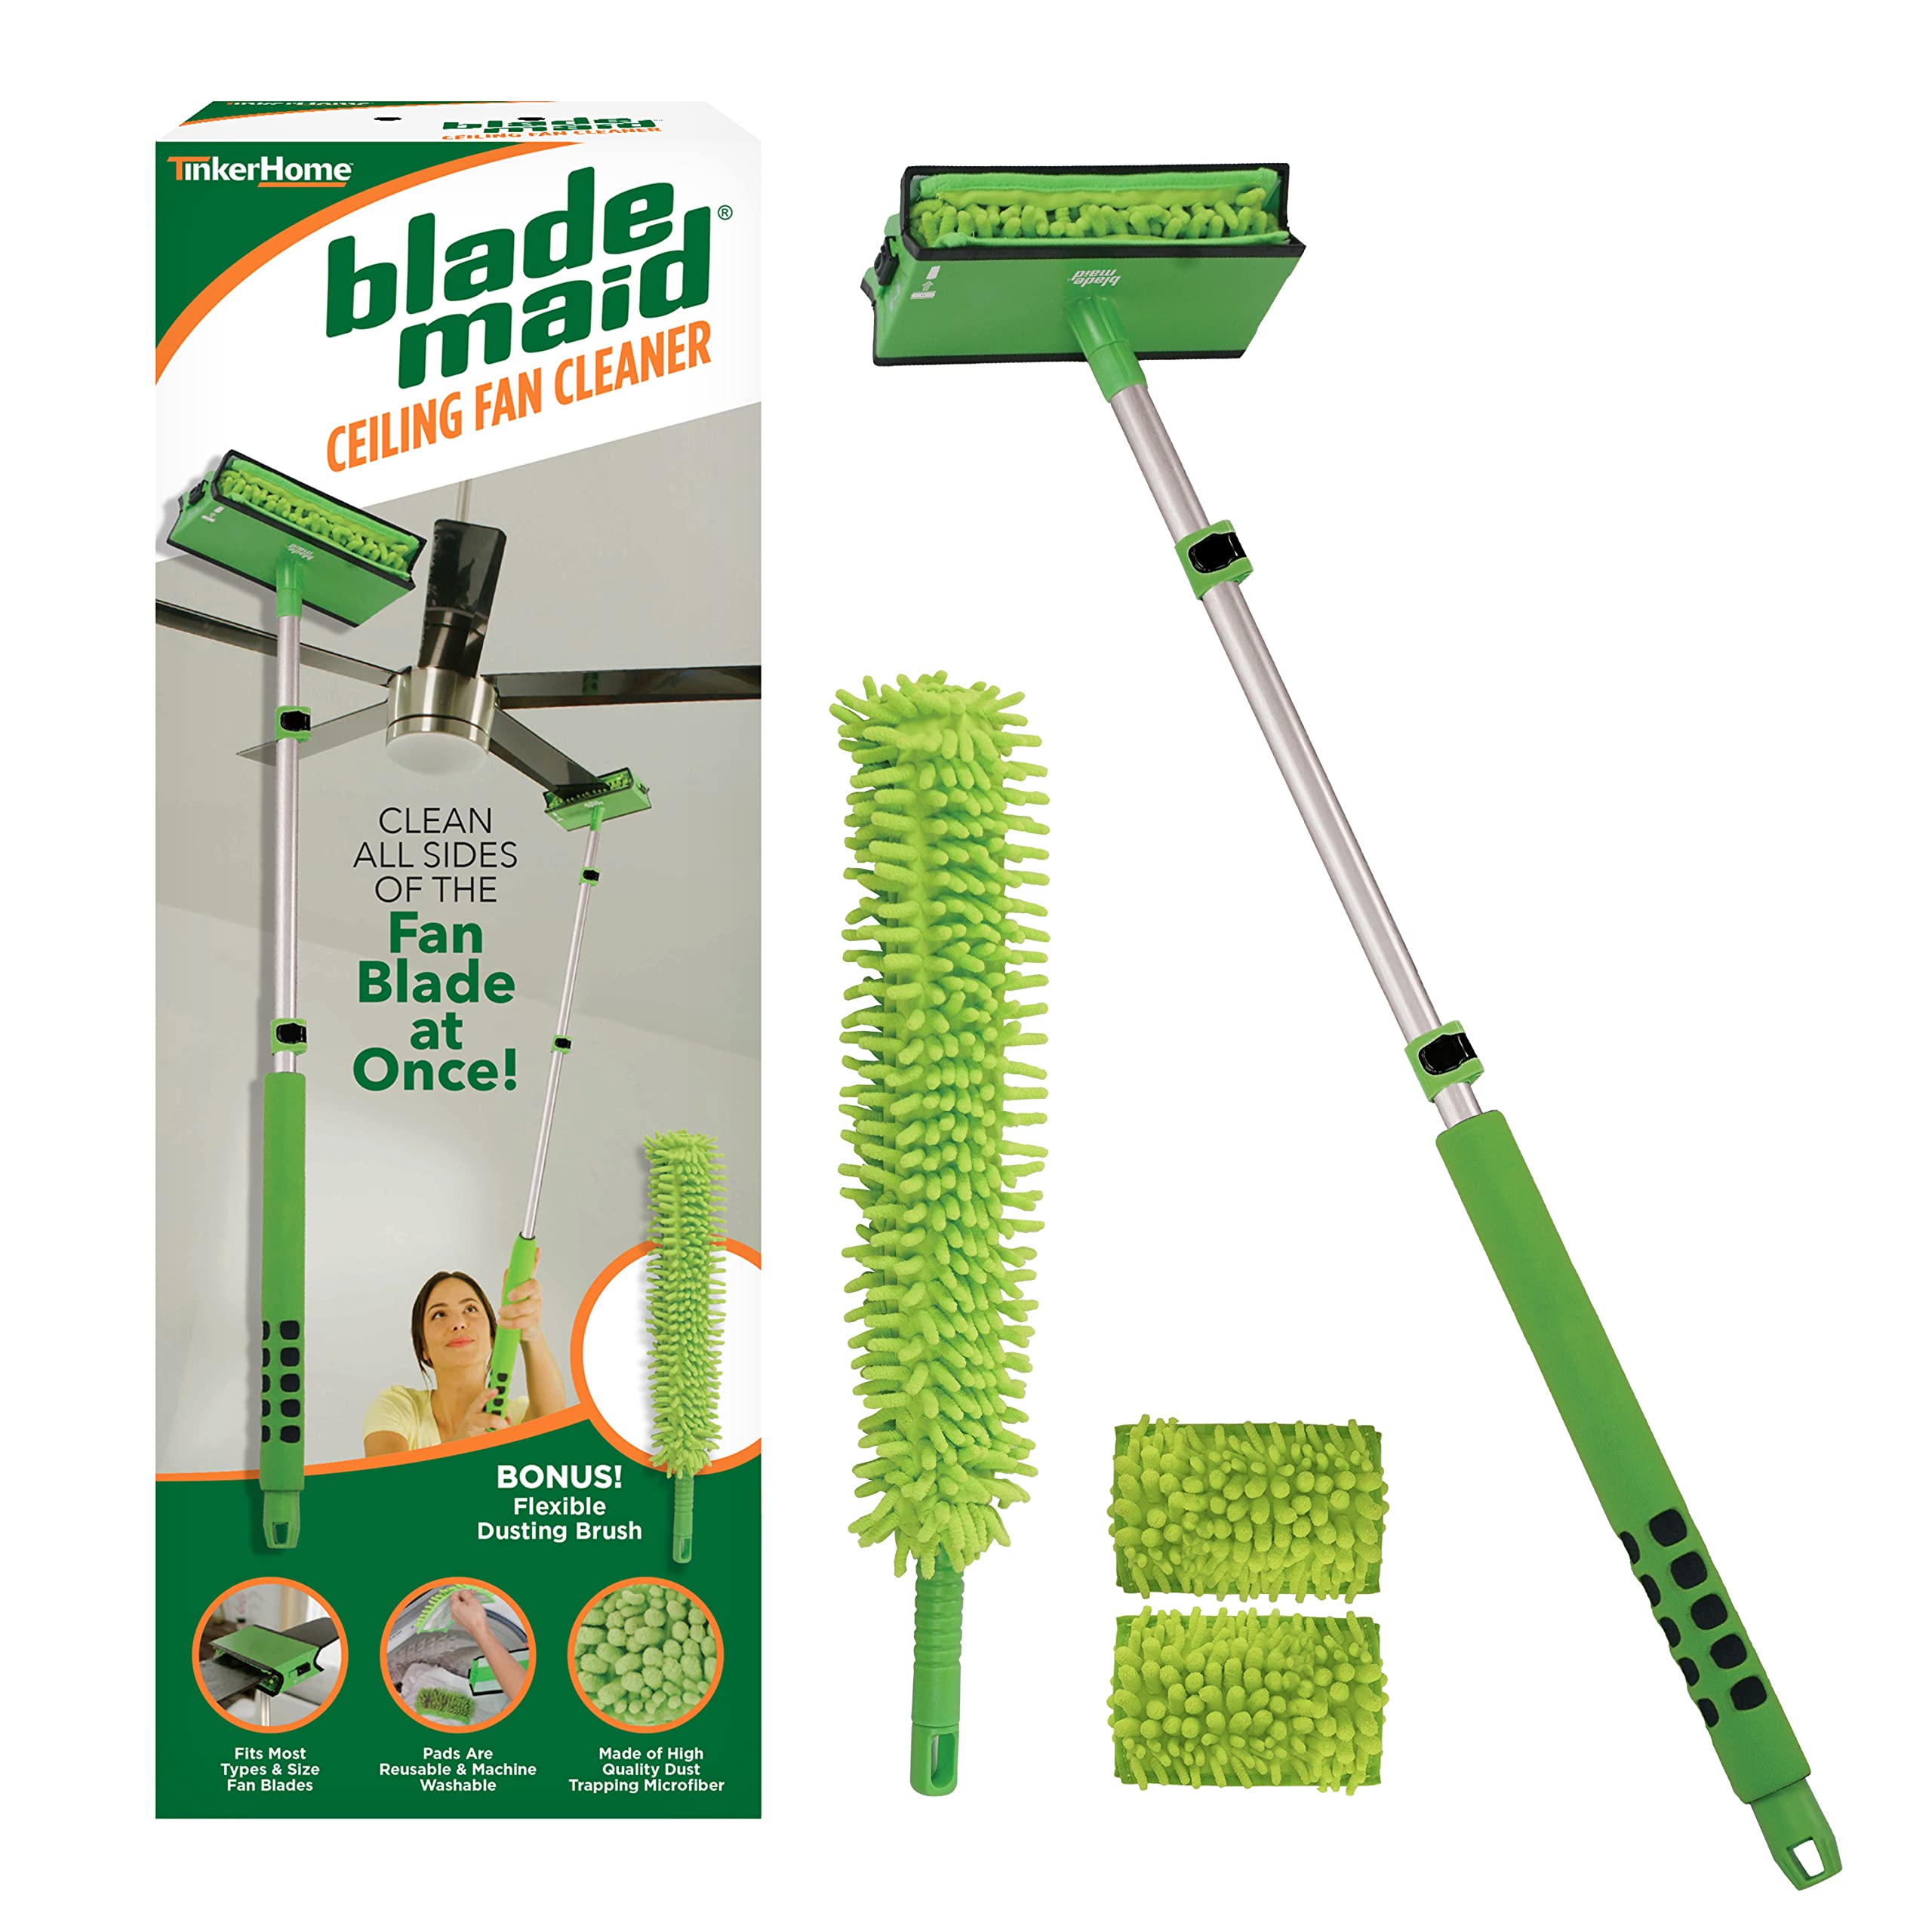 Blade Maid Ceiling Fan Cleaner- Cleaning Tool with 3 Foot Extendable Pole, Cleaning Head, Reusable Fiber Duster, & Flexible Brush